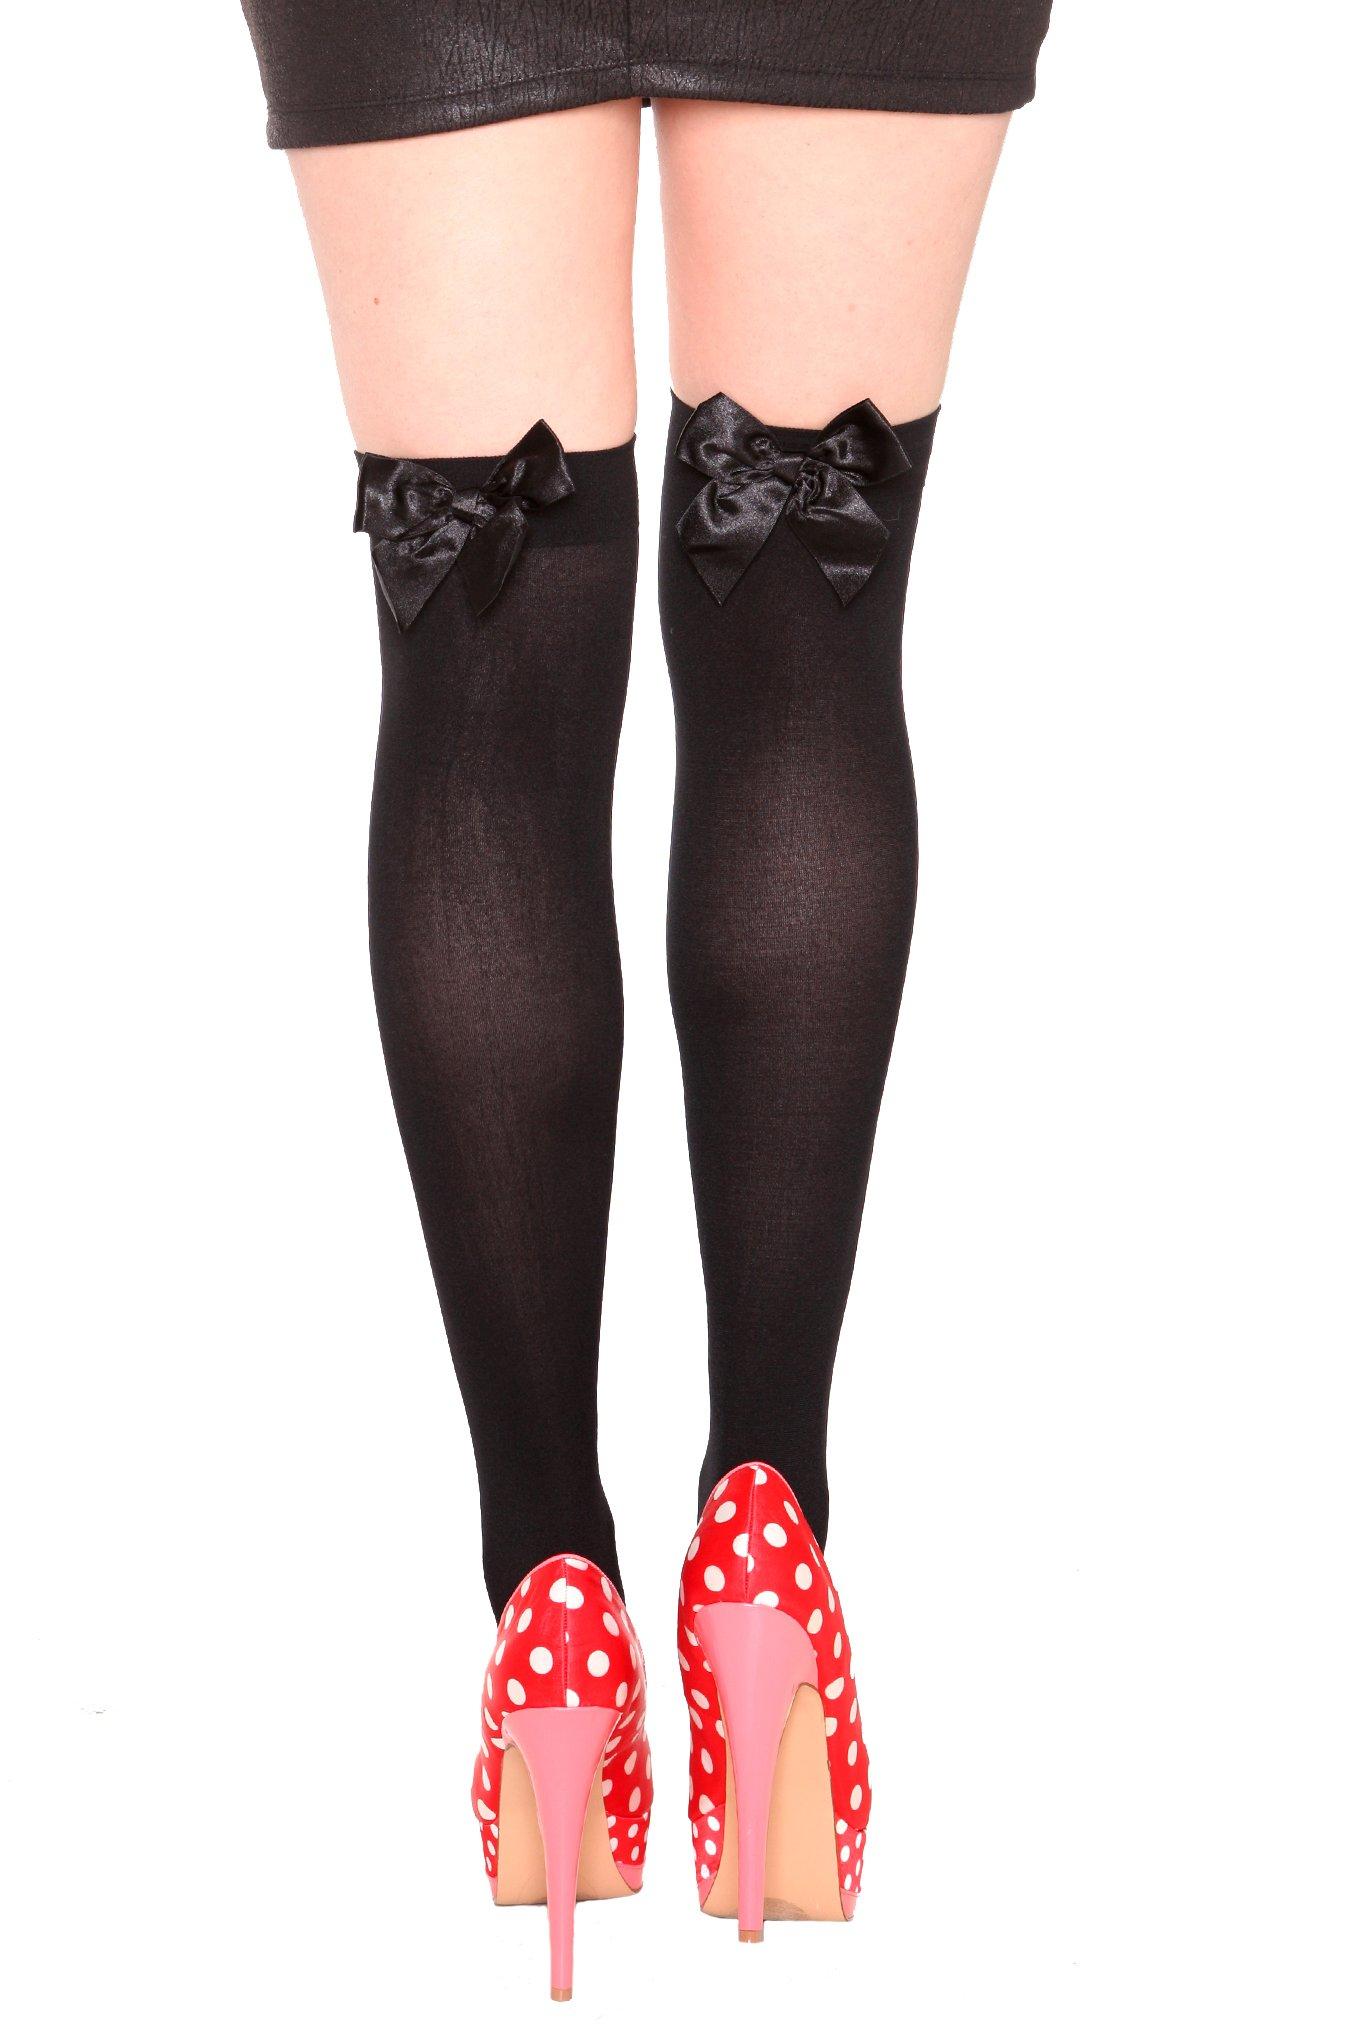 Black Over The Knee Thigh Highs With Bow Hot Topic 